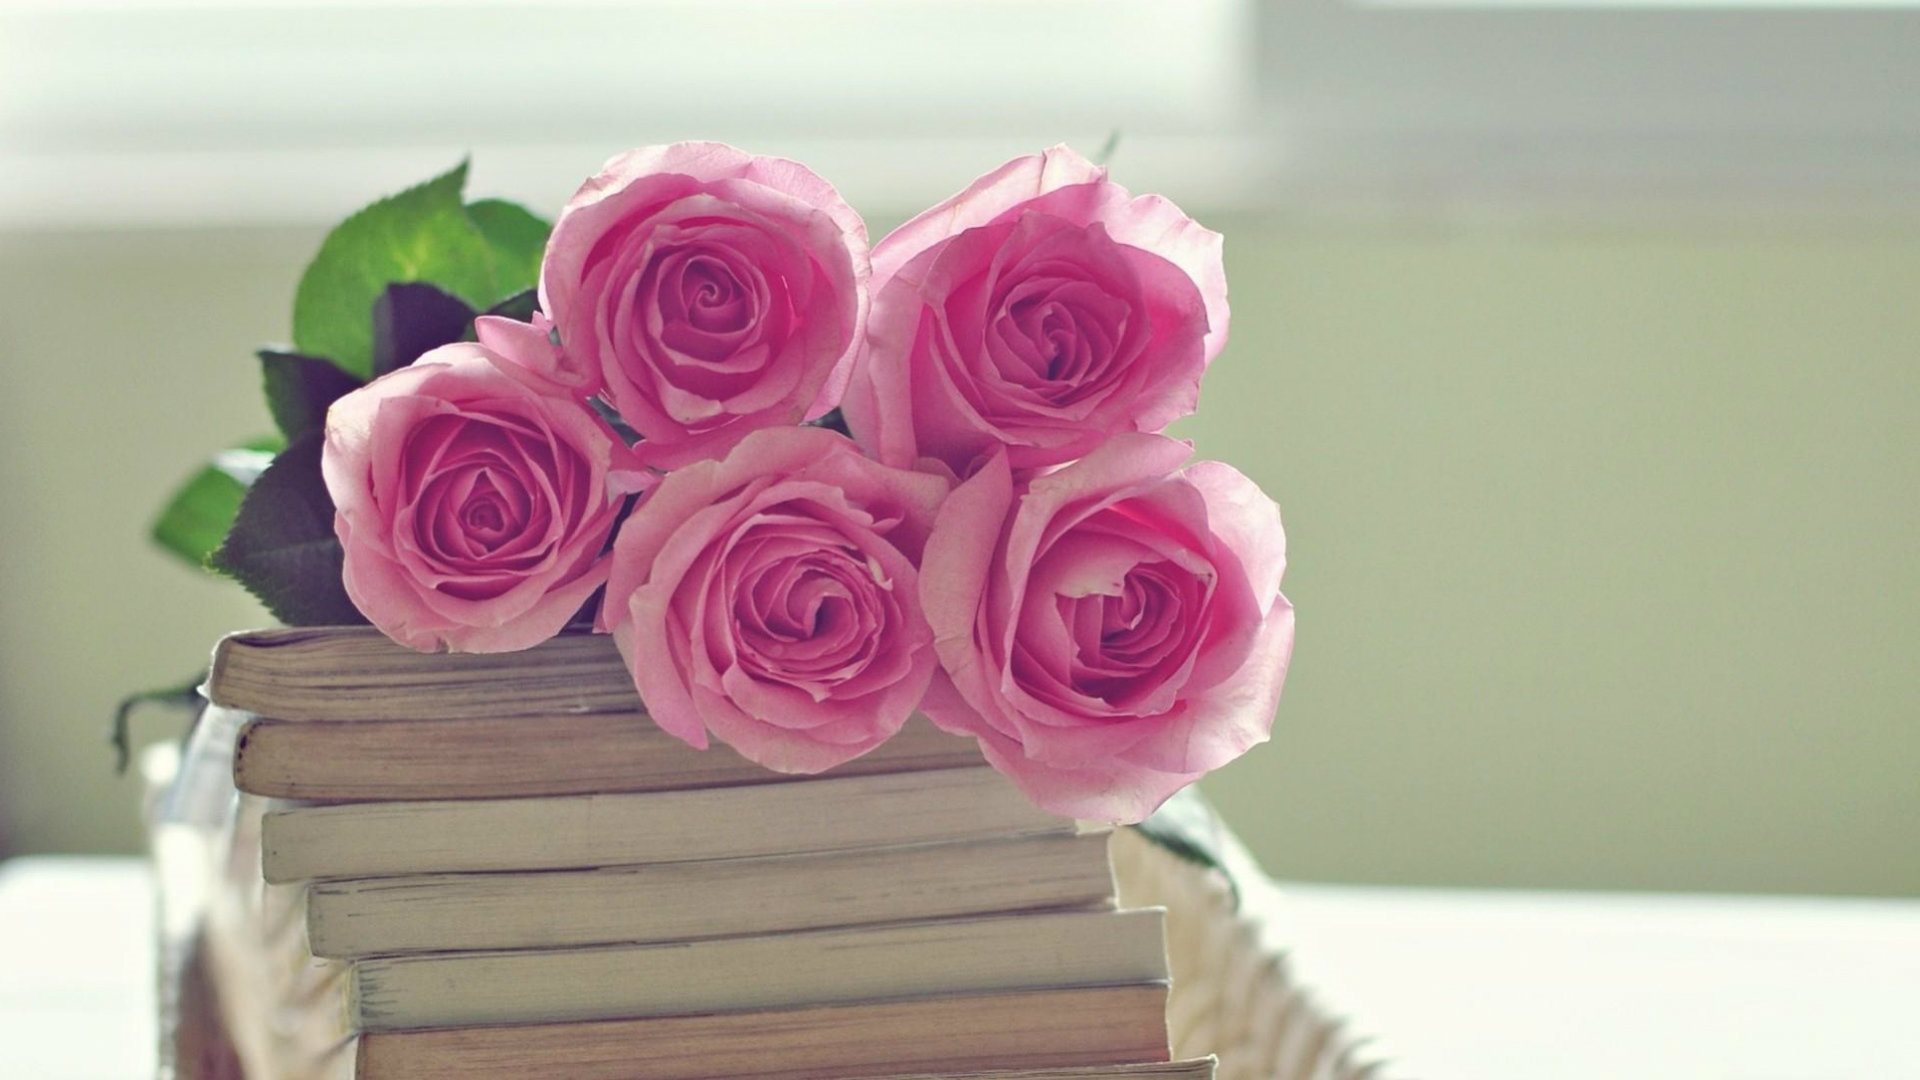 Full Hd 1080p Pink Rose Wallpaper - Rose Wallpaper Of Books And Flowers , HD Wallpaper & Backgrounds